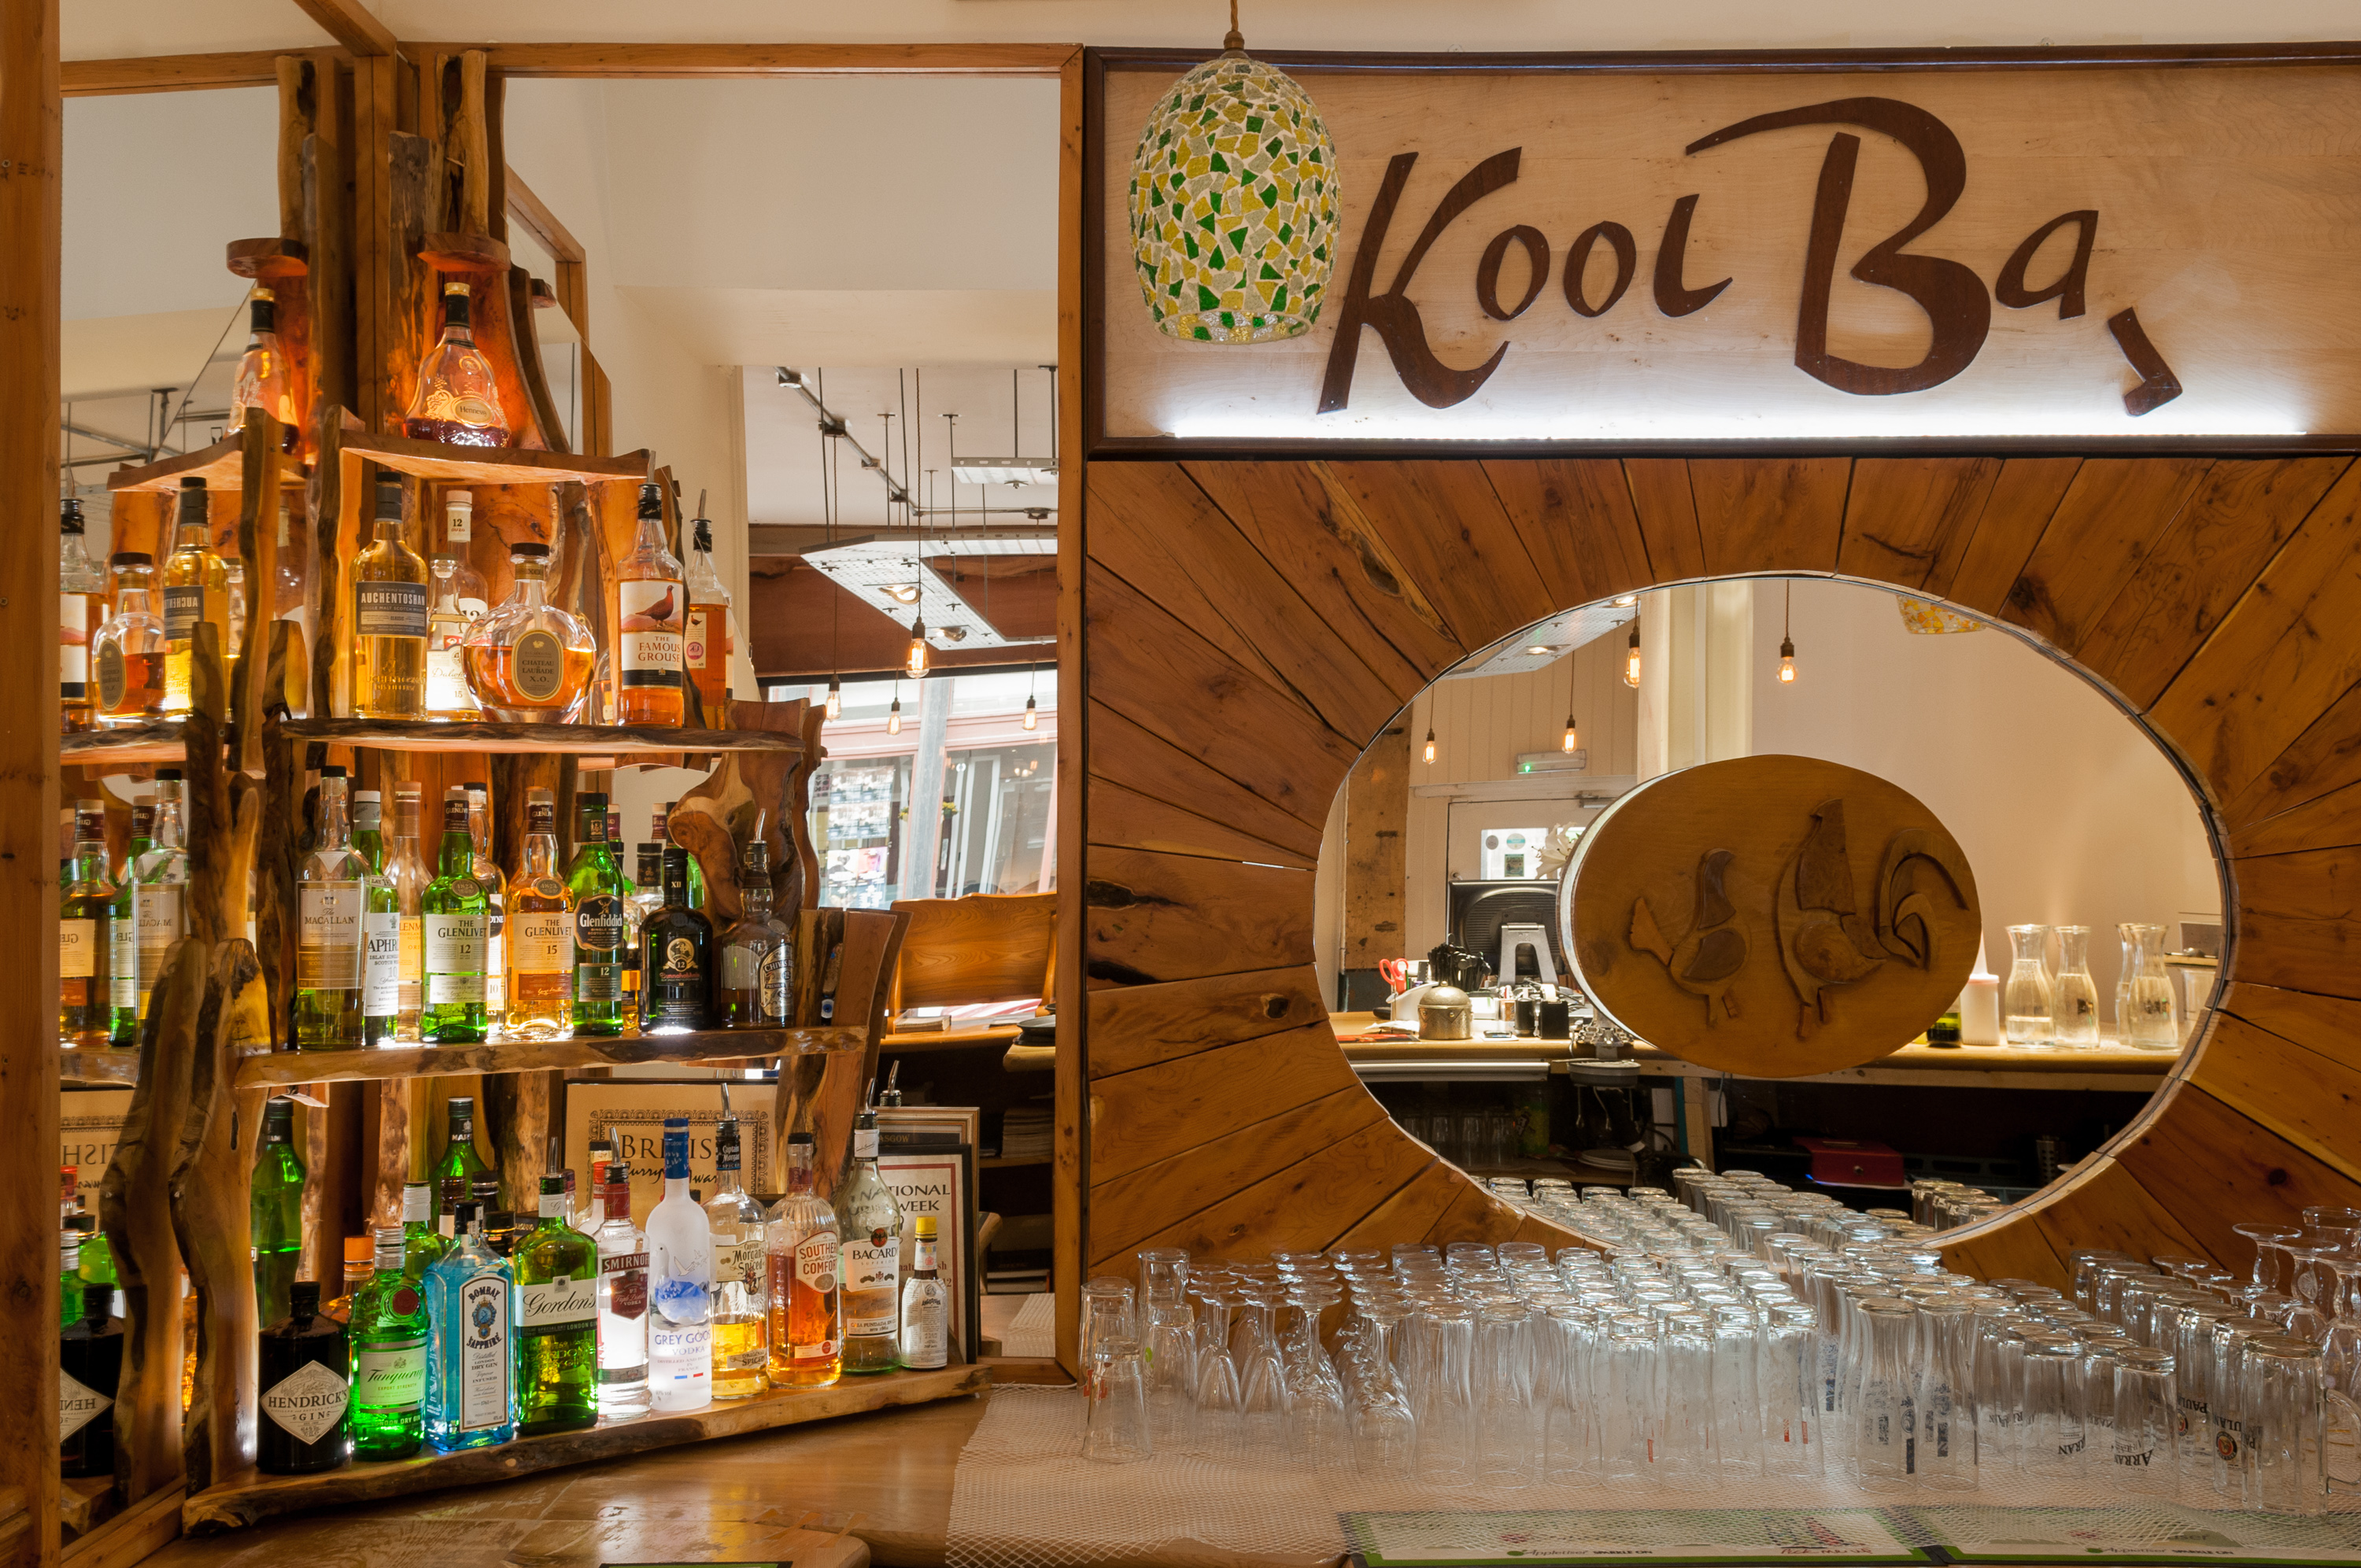 Planning a Special Occasion? Book a Table at Koolba Restaurant in Merchant City